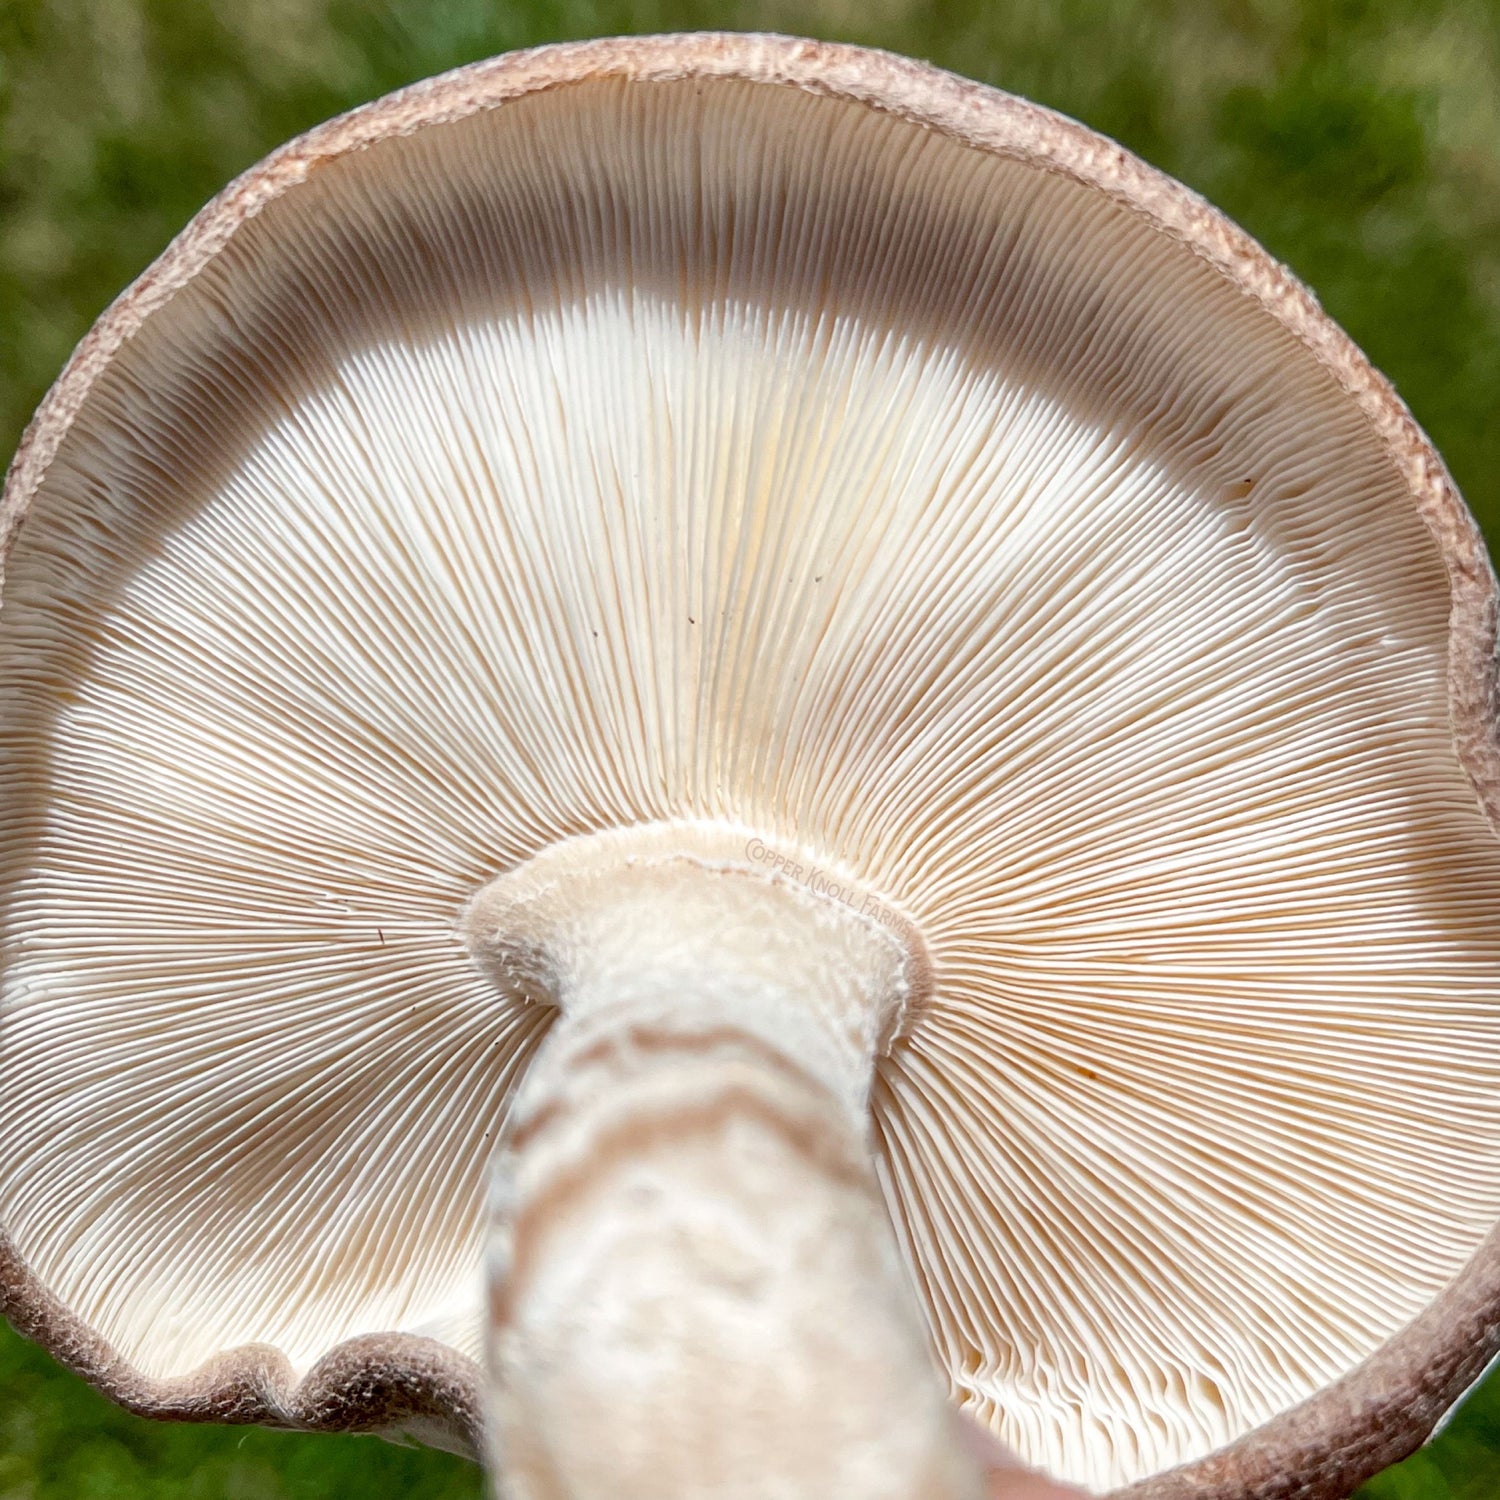 Shiitake Mushroom Gills from Copper Knoll Farms in New Jersey